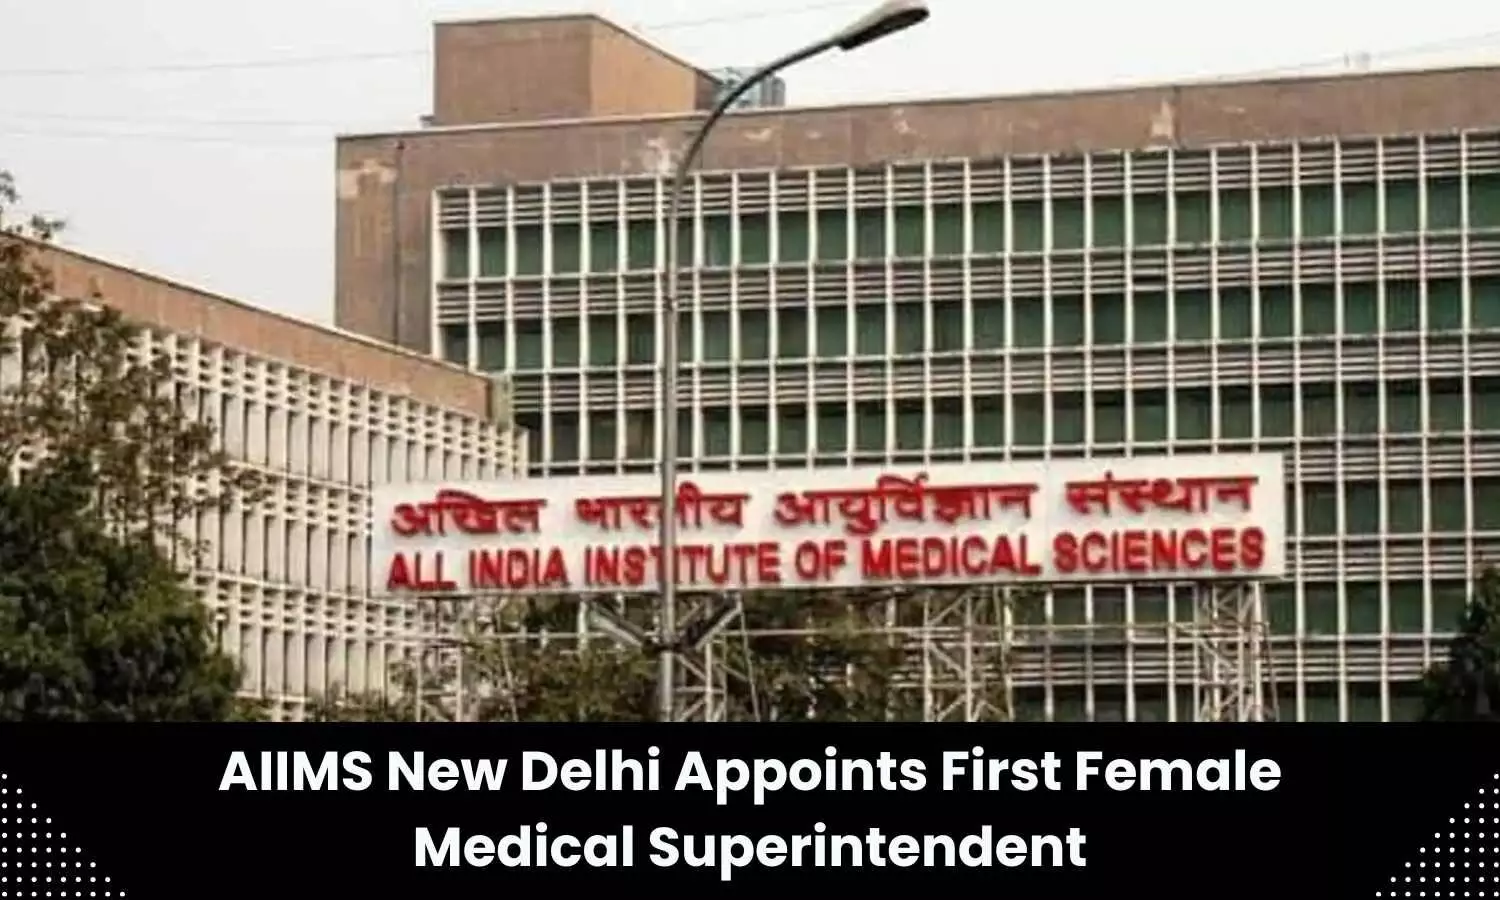 Dr Nirupam Madaan appointed as new Medical Superintendent of AIIMS Delhi